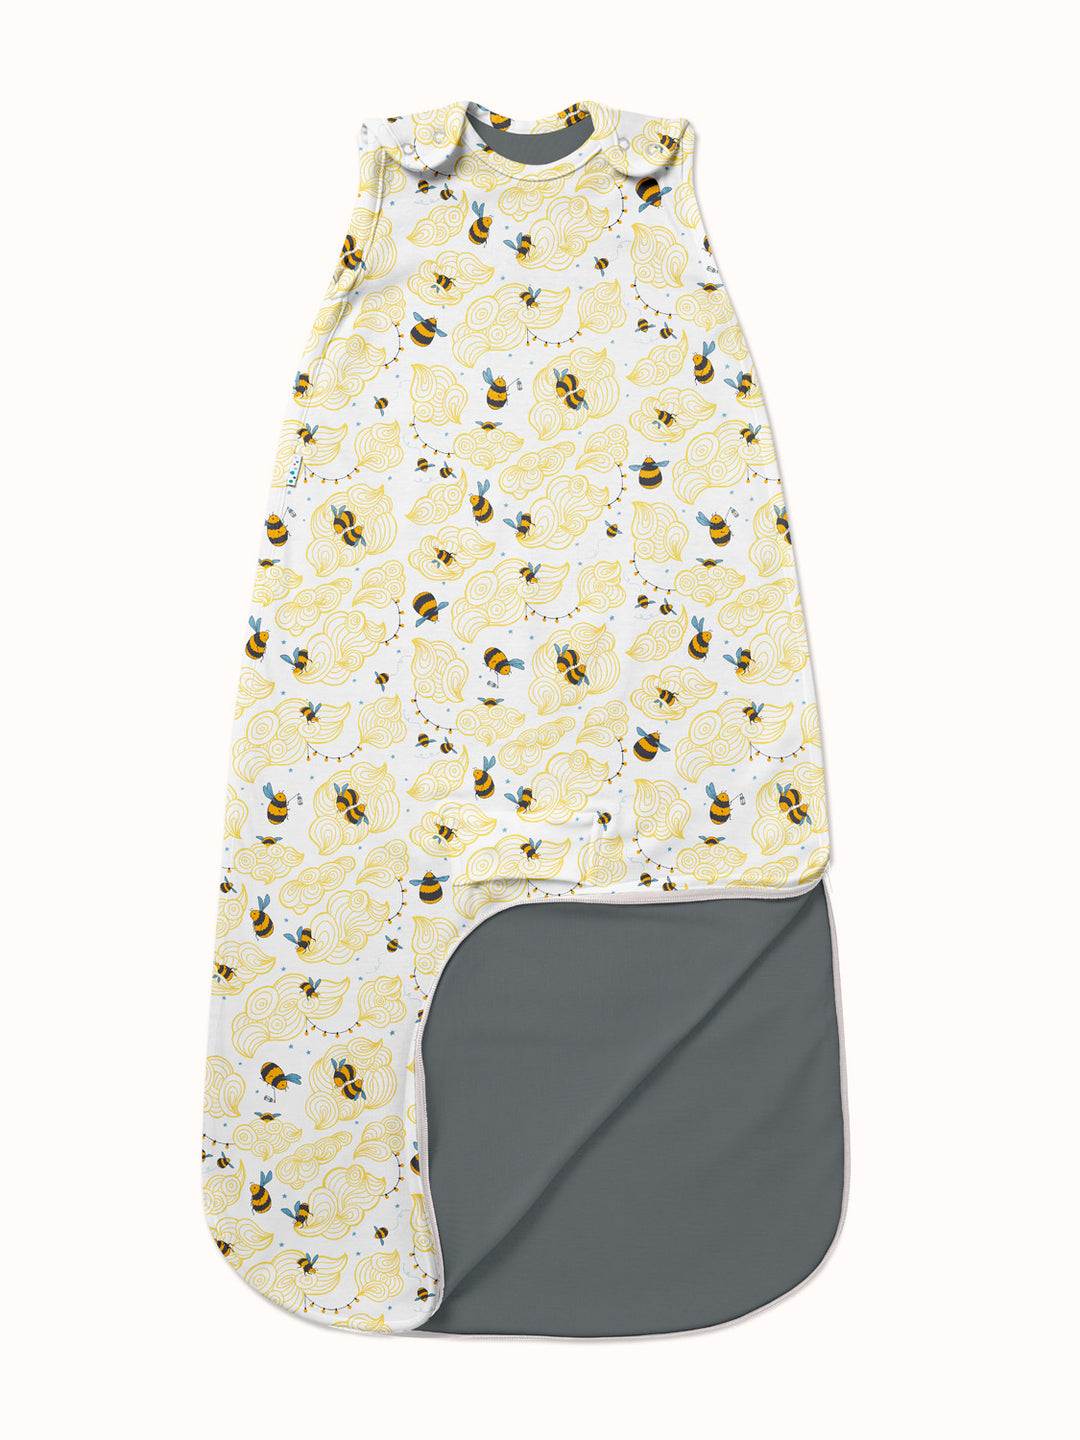 Imperfect Merino Baby Sleeping Bag Imperfect Superlove Outlet Bumble